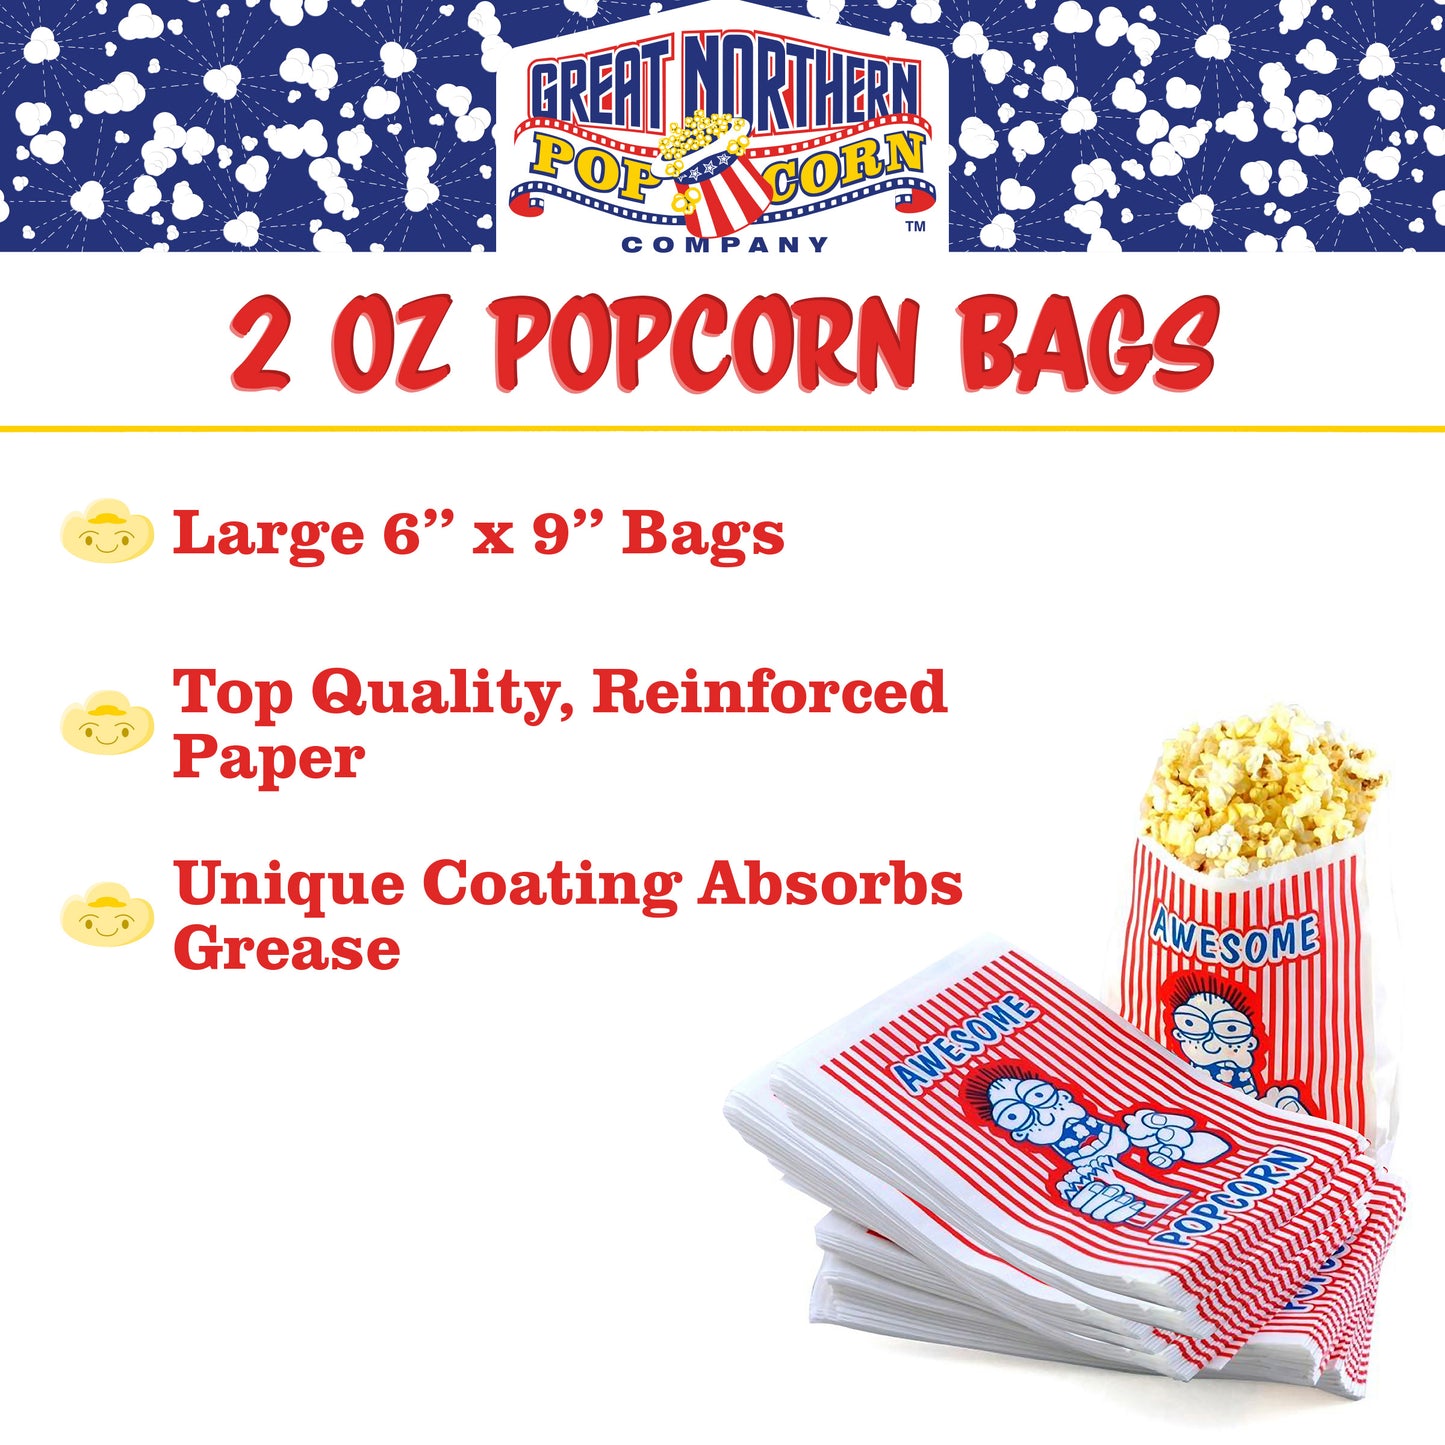 100 Popcorn Bags and 8 Ounce All-in-One Popcorn Packs  – Case of 12